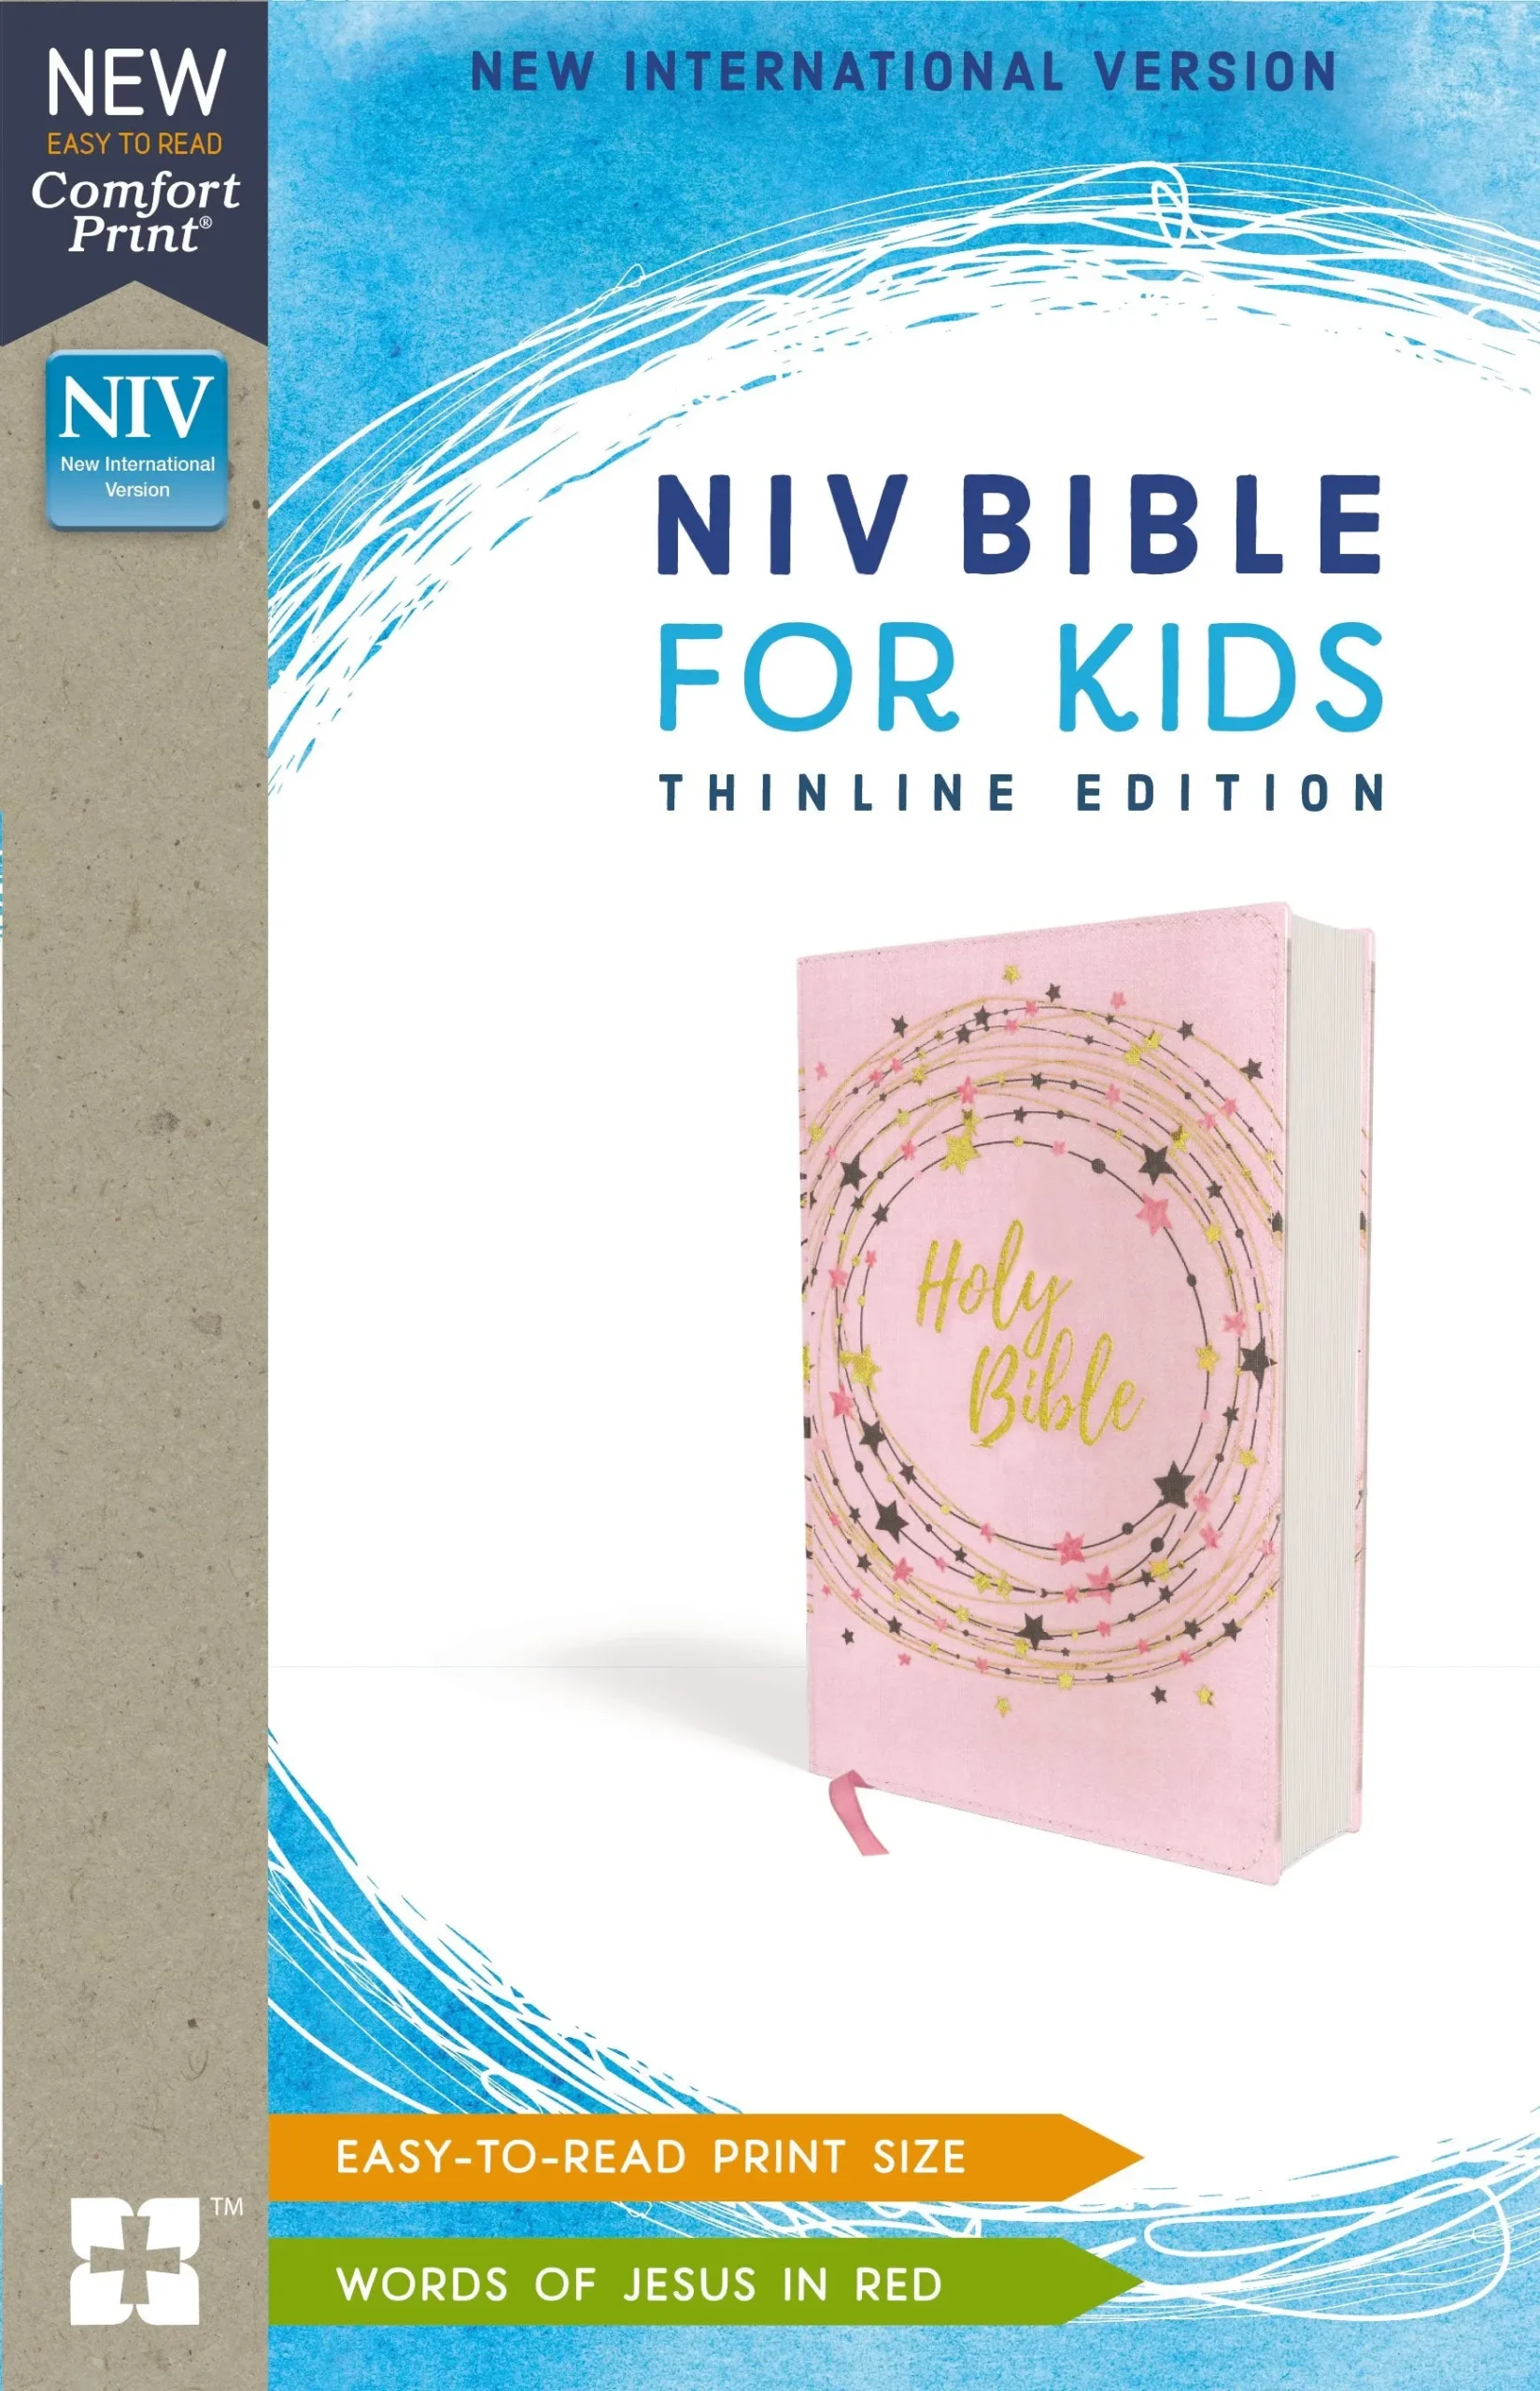 is niv bible good for beginners